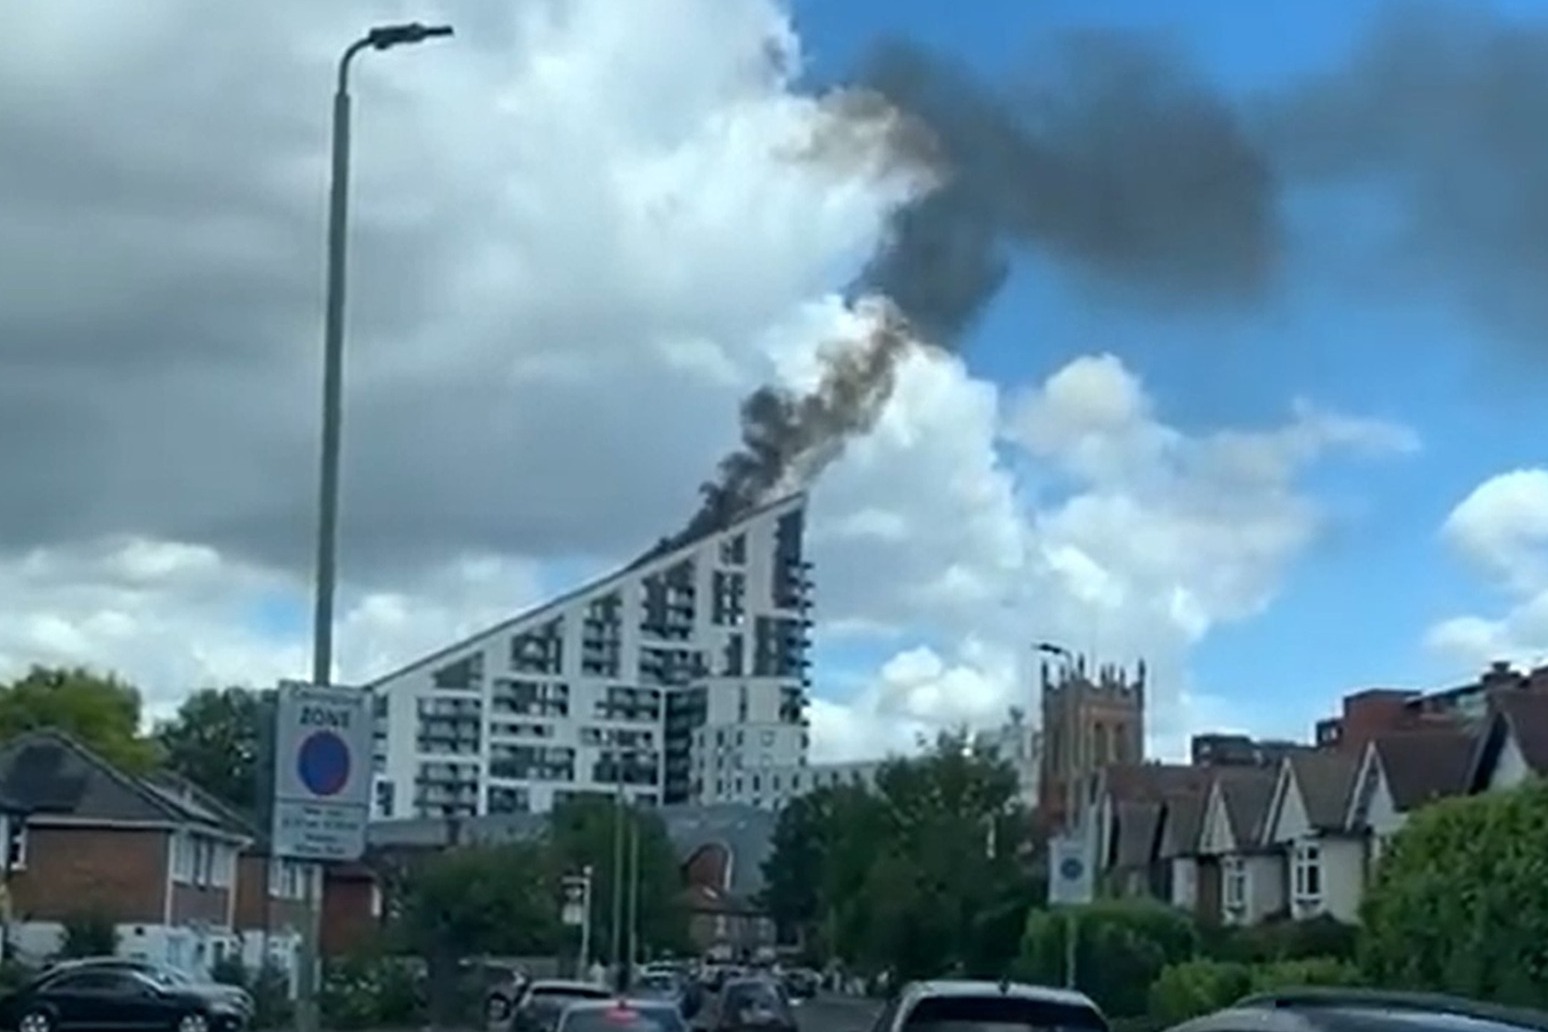 80 firefighters tackling blaze at 17 storey block of flats in London